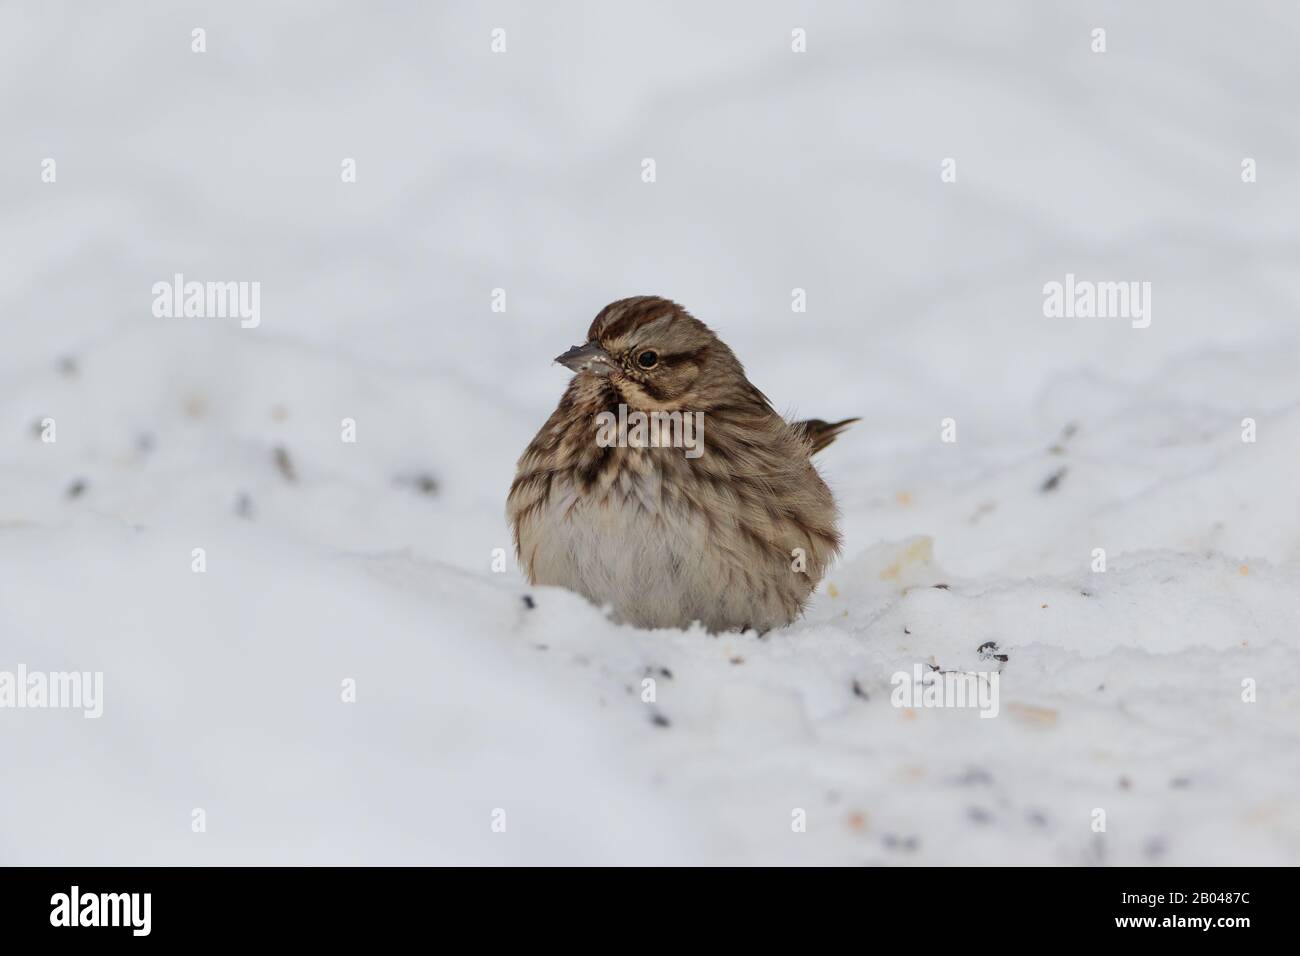 Song Sparrow eating bird feeder grains in snow on the ground Stock Photo